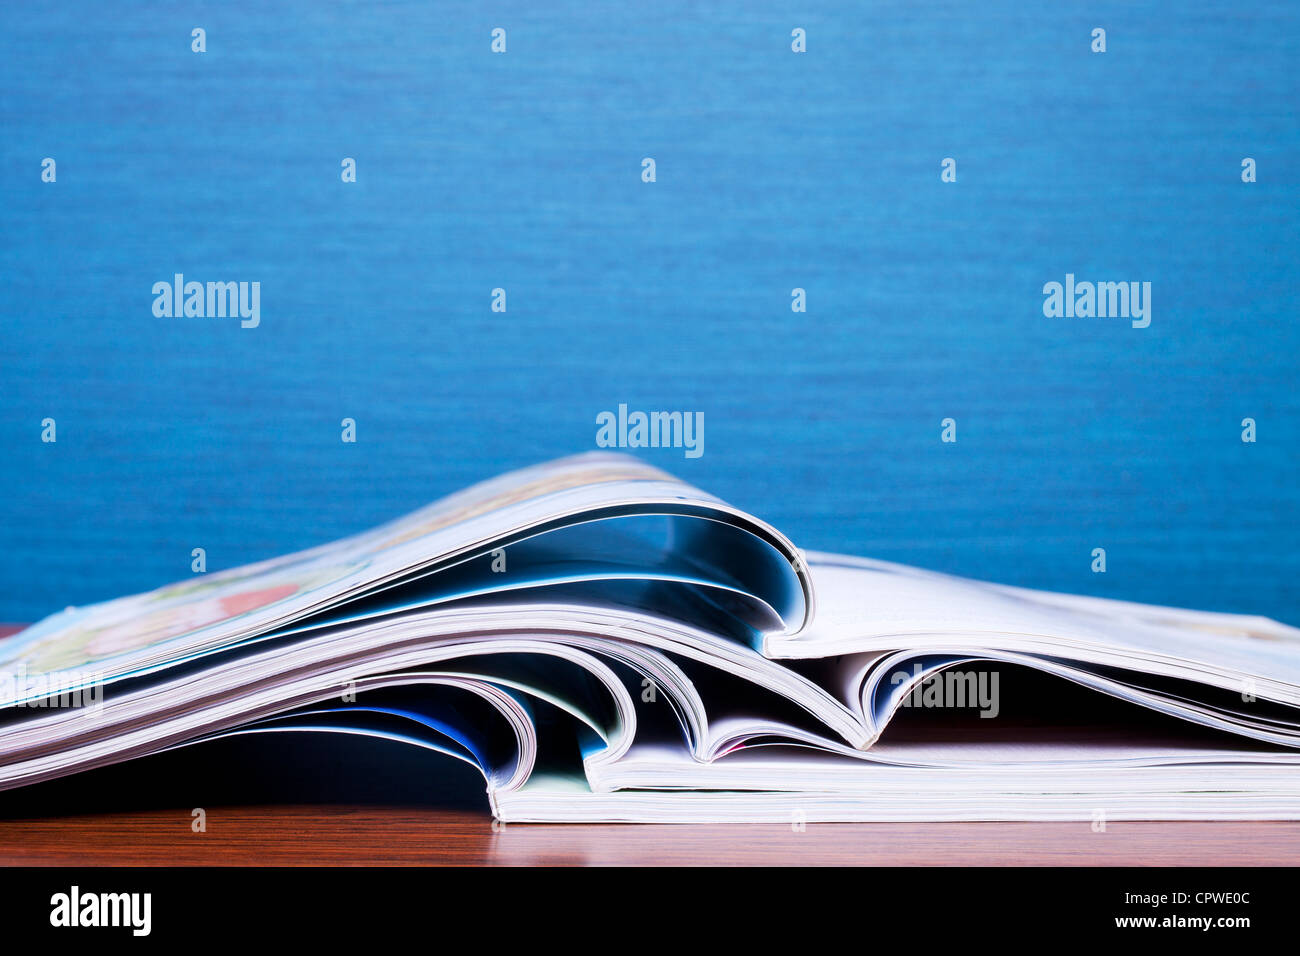 Magazines on Table with blue wall behind. Copy space, shallow DOF. Stock Photo